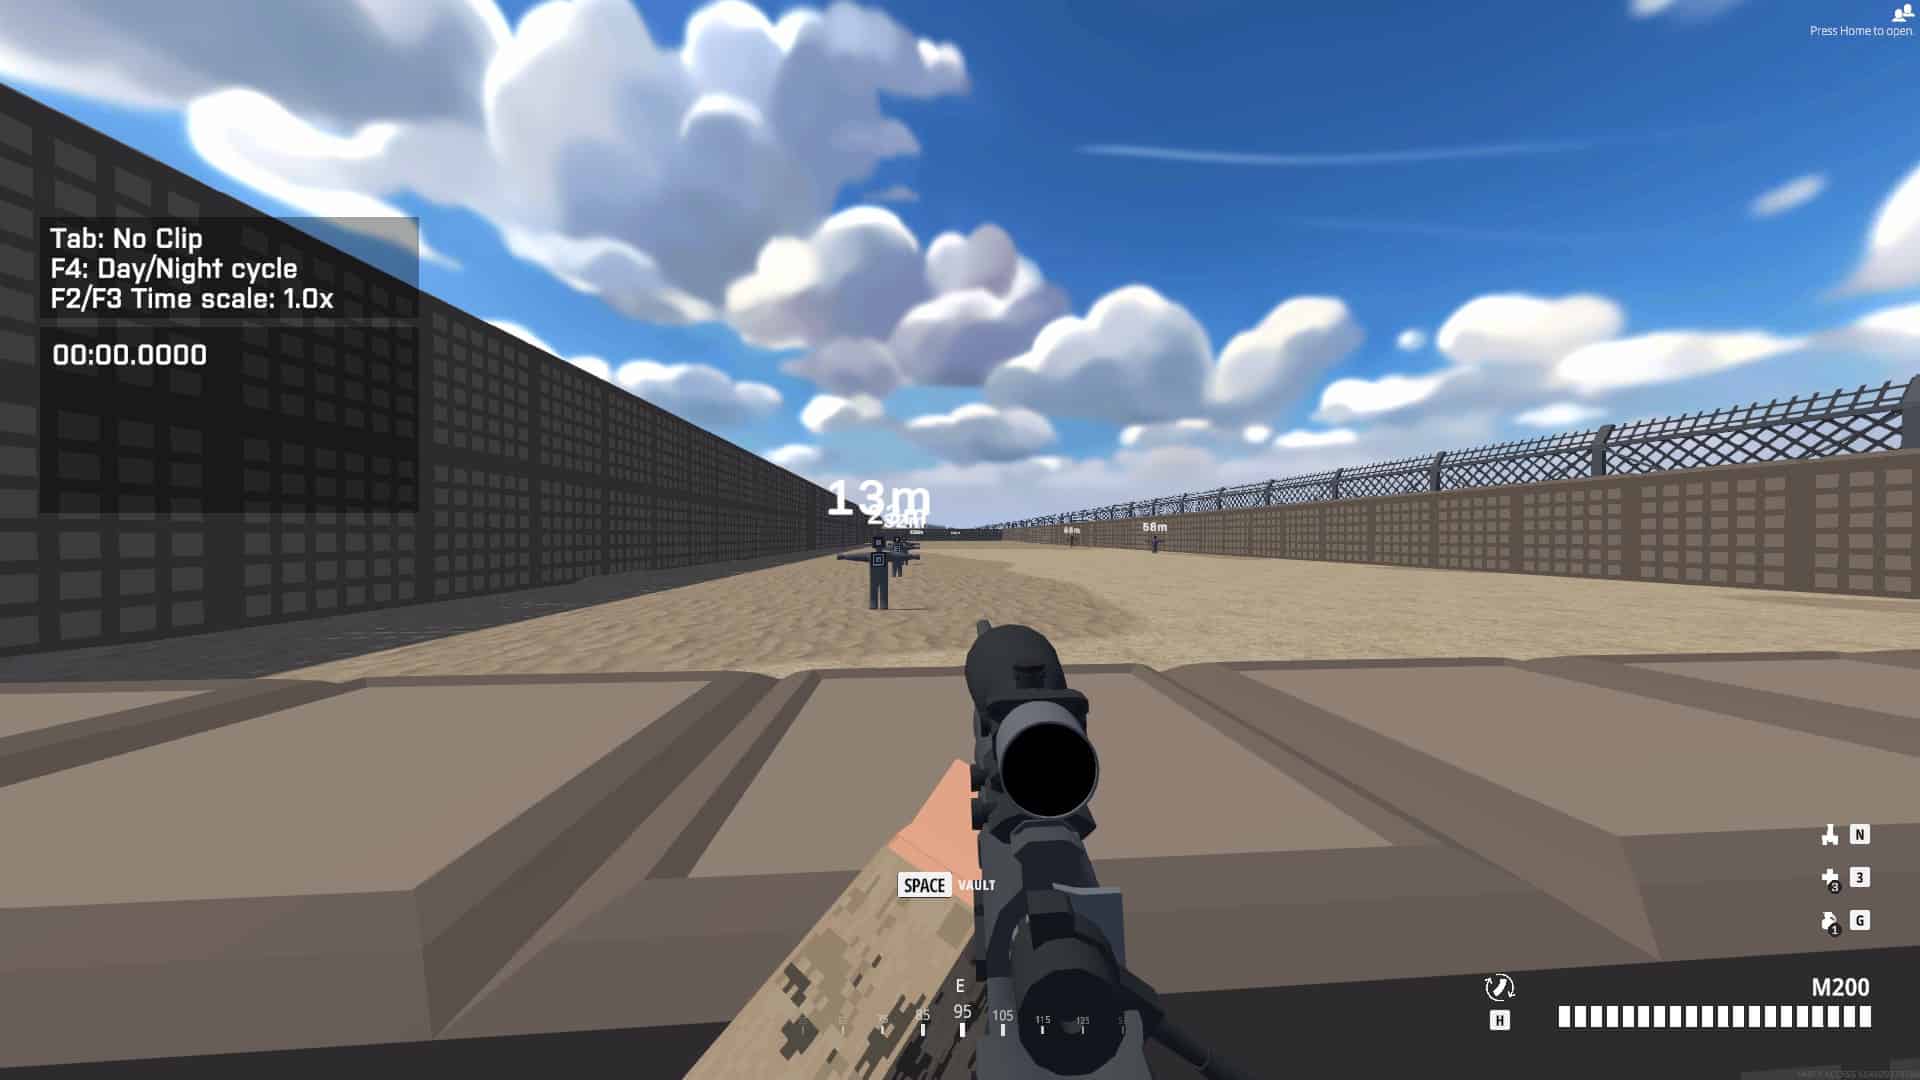 BattleBit Remastered best weapons: An image of the M200 weapon used in a training range in BattleBit Remastered.